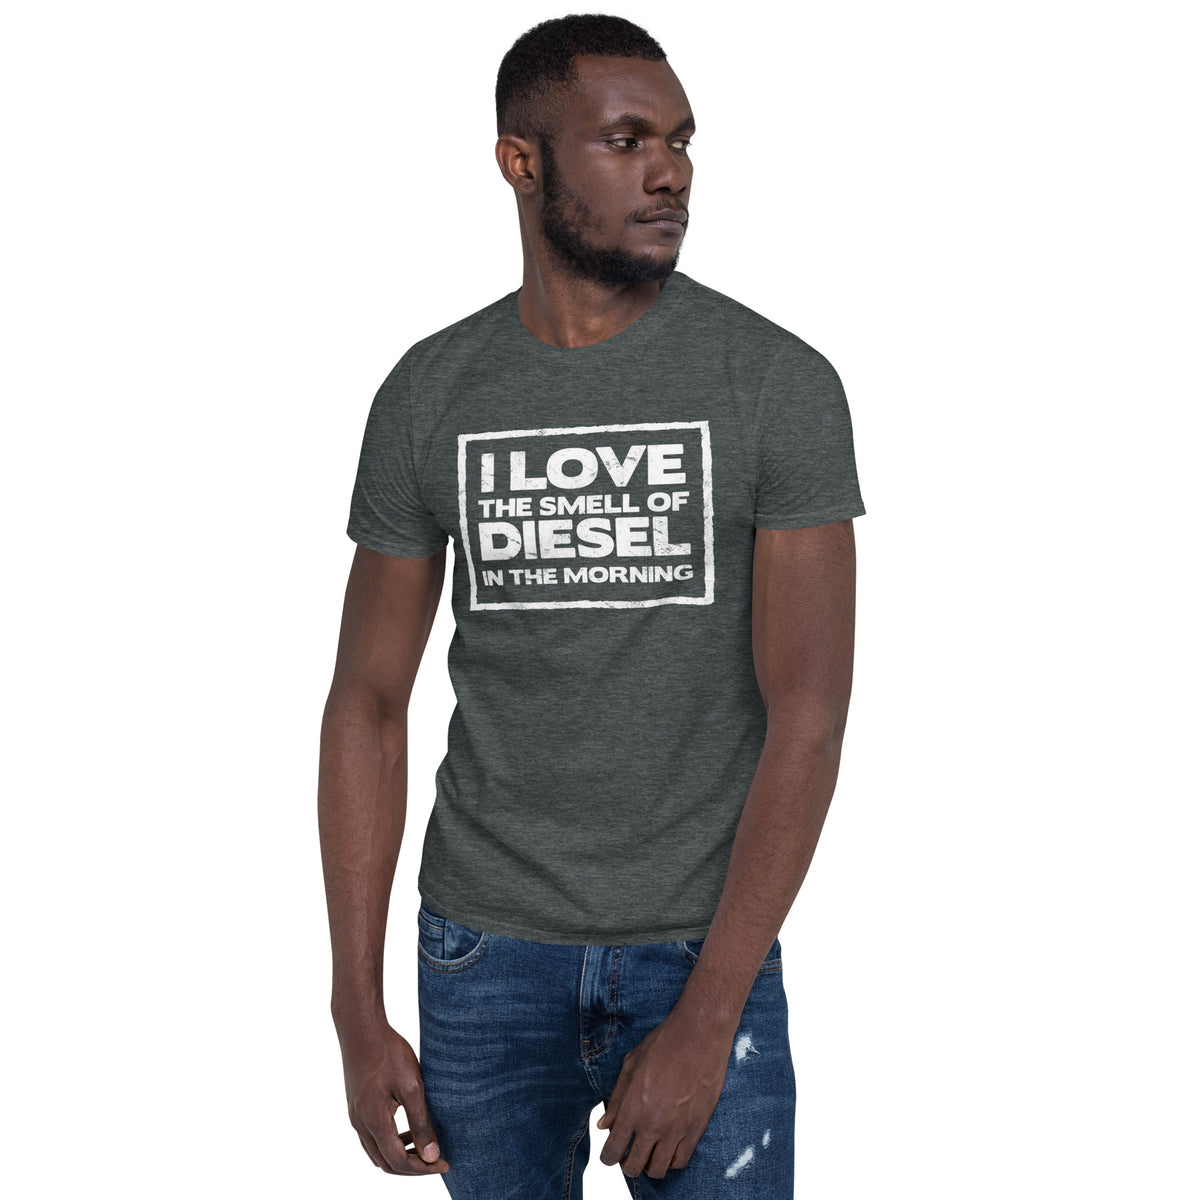 Cooles Herren Spruch Shirt "I love the smell"